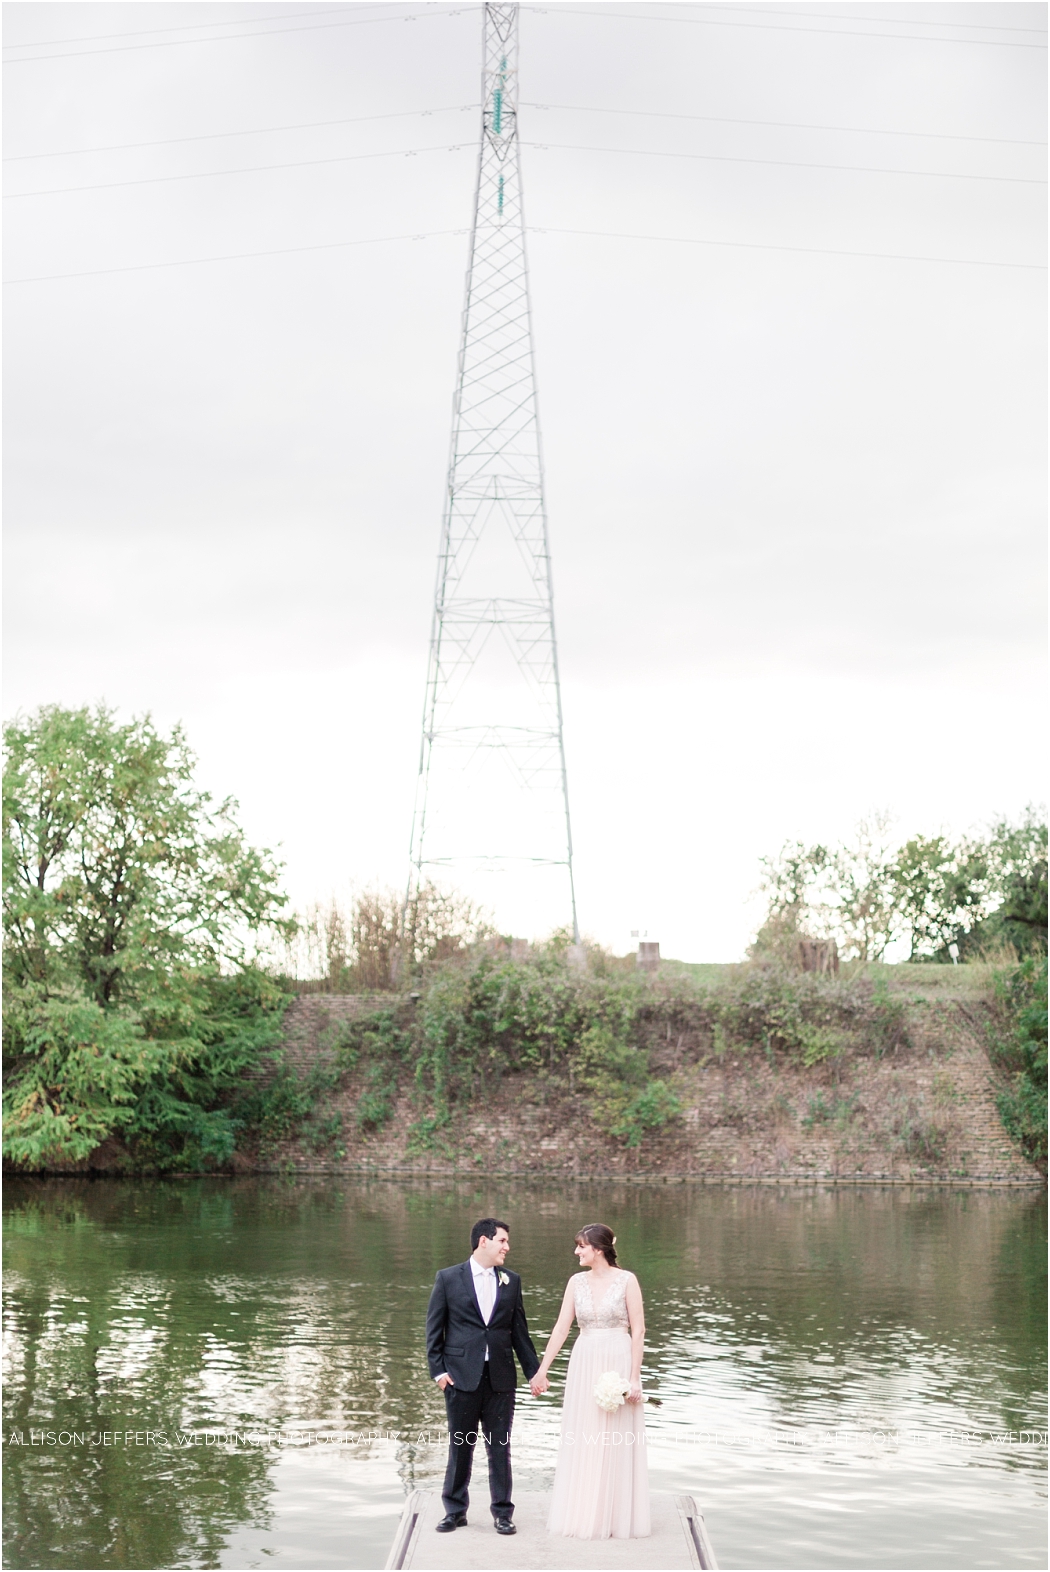 a-teal-and-blush-wedding-at-lakeside-pavillion-in-marble-falls-texas-by-allison-jeffers-wedding-photography-austin-wedding-photographer_0071